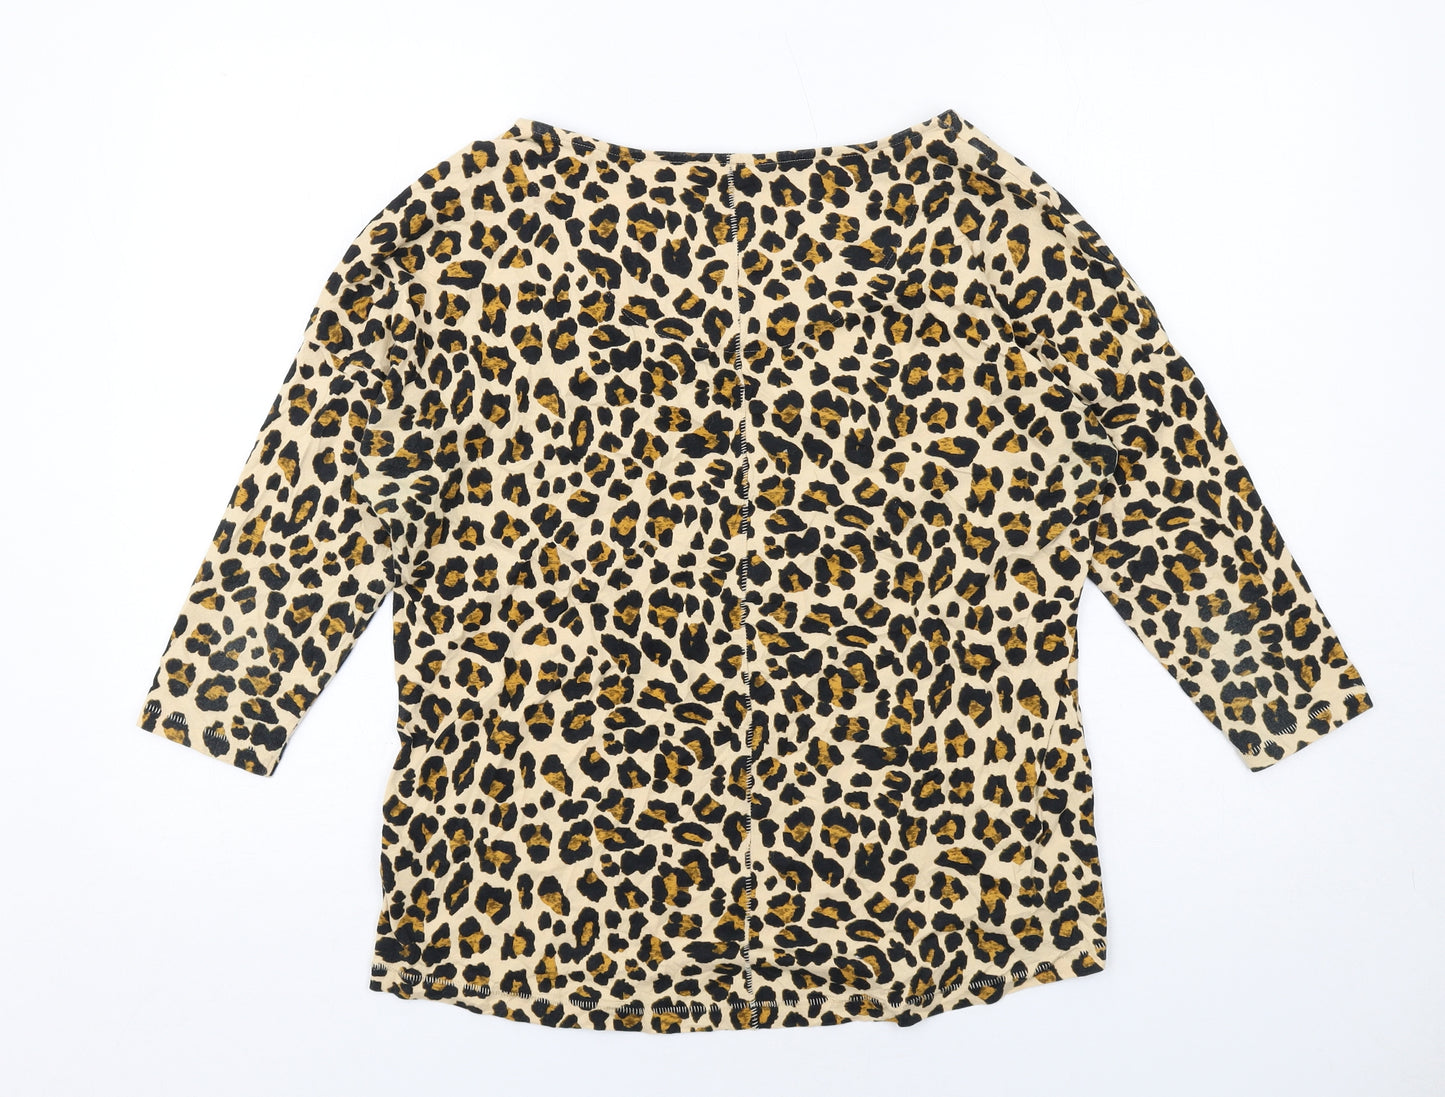 Marks and Spencer Womens Beige Animal Print Cotton Basic Blouse Size 16 Round Neck - Leopard Print